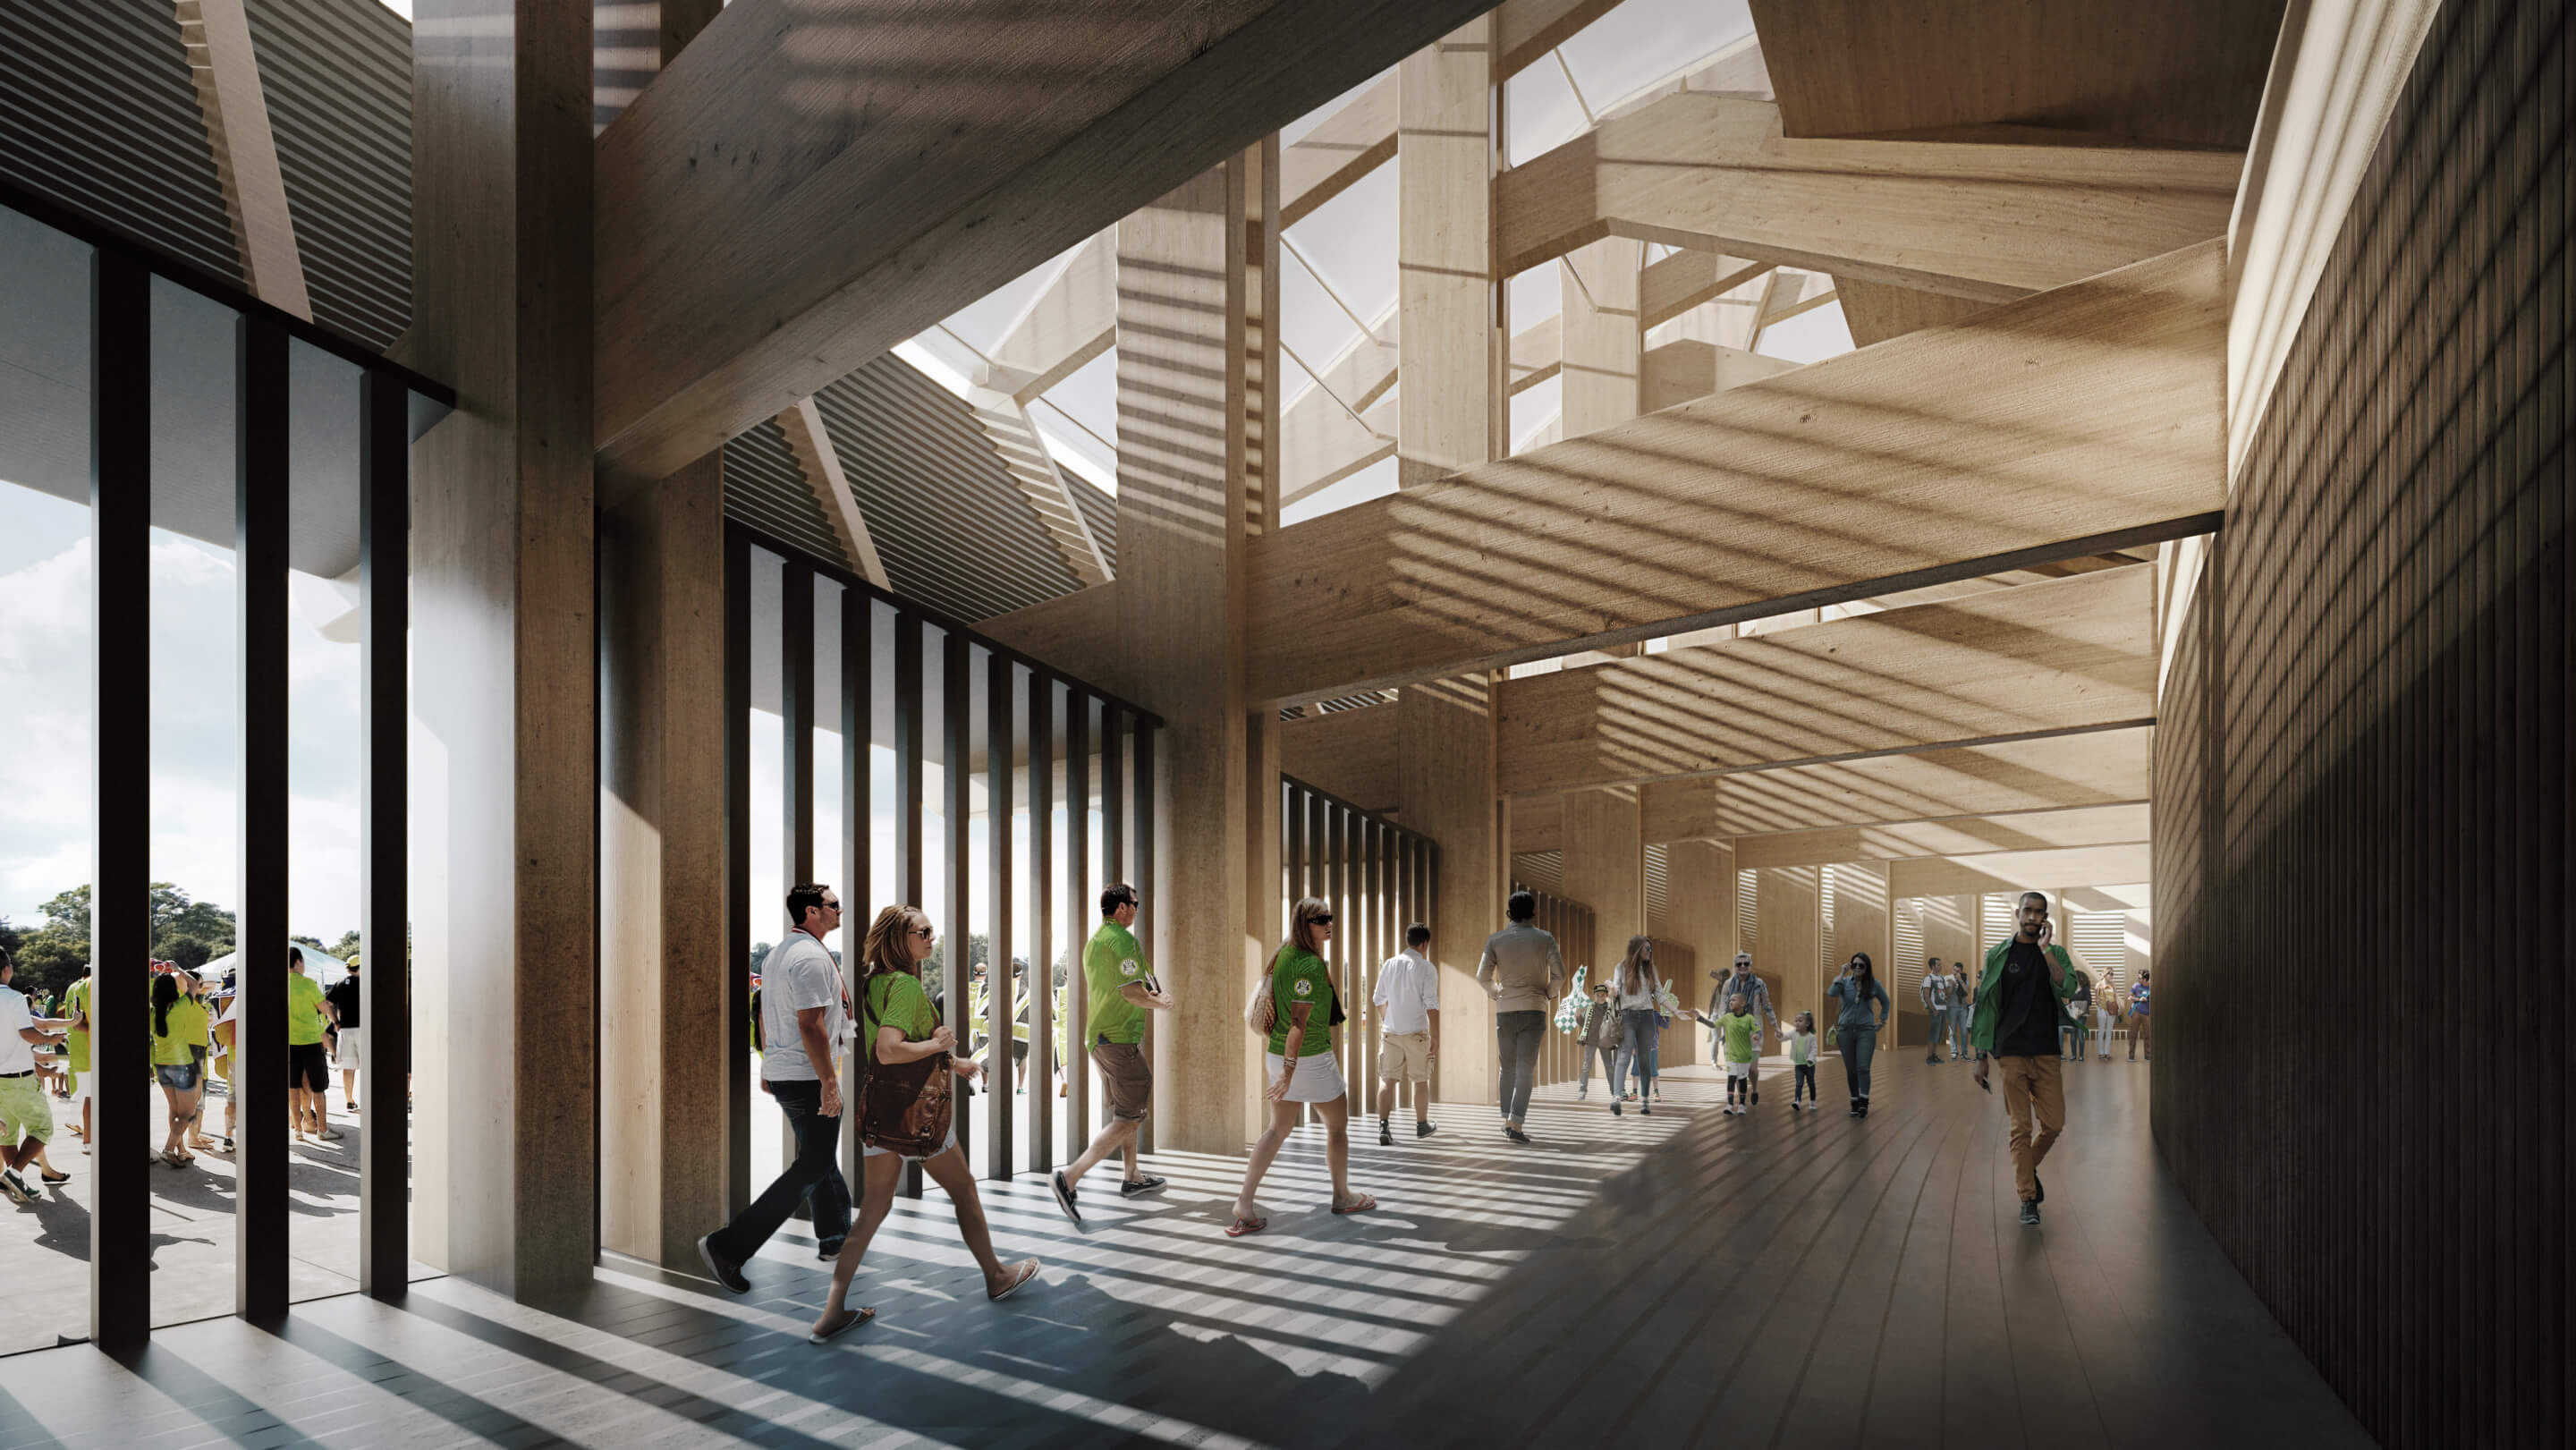 Interior rendering of eco park stadium with a void above the beams and columns